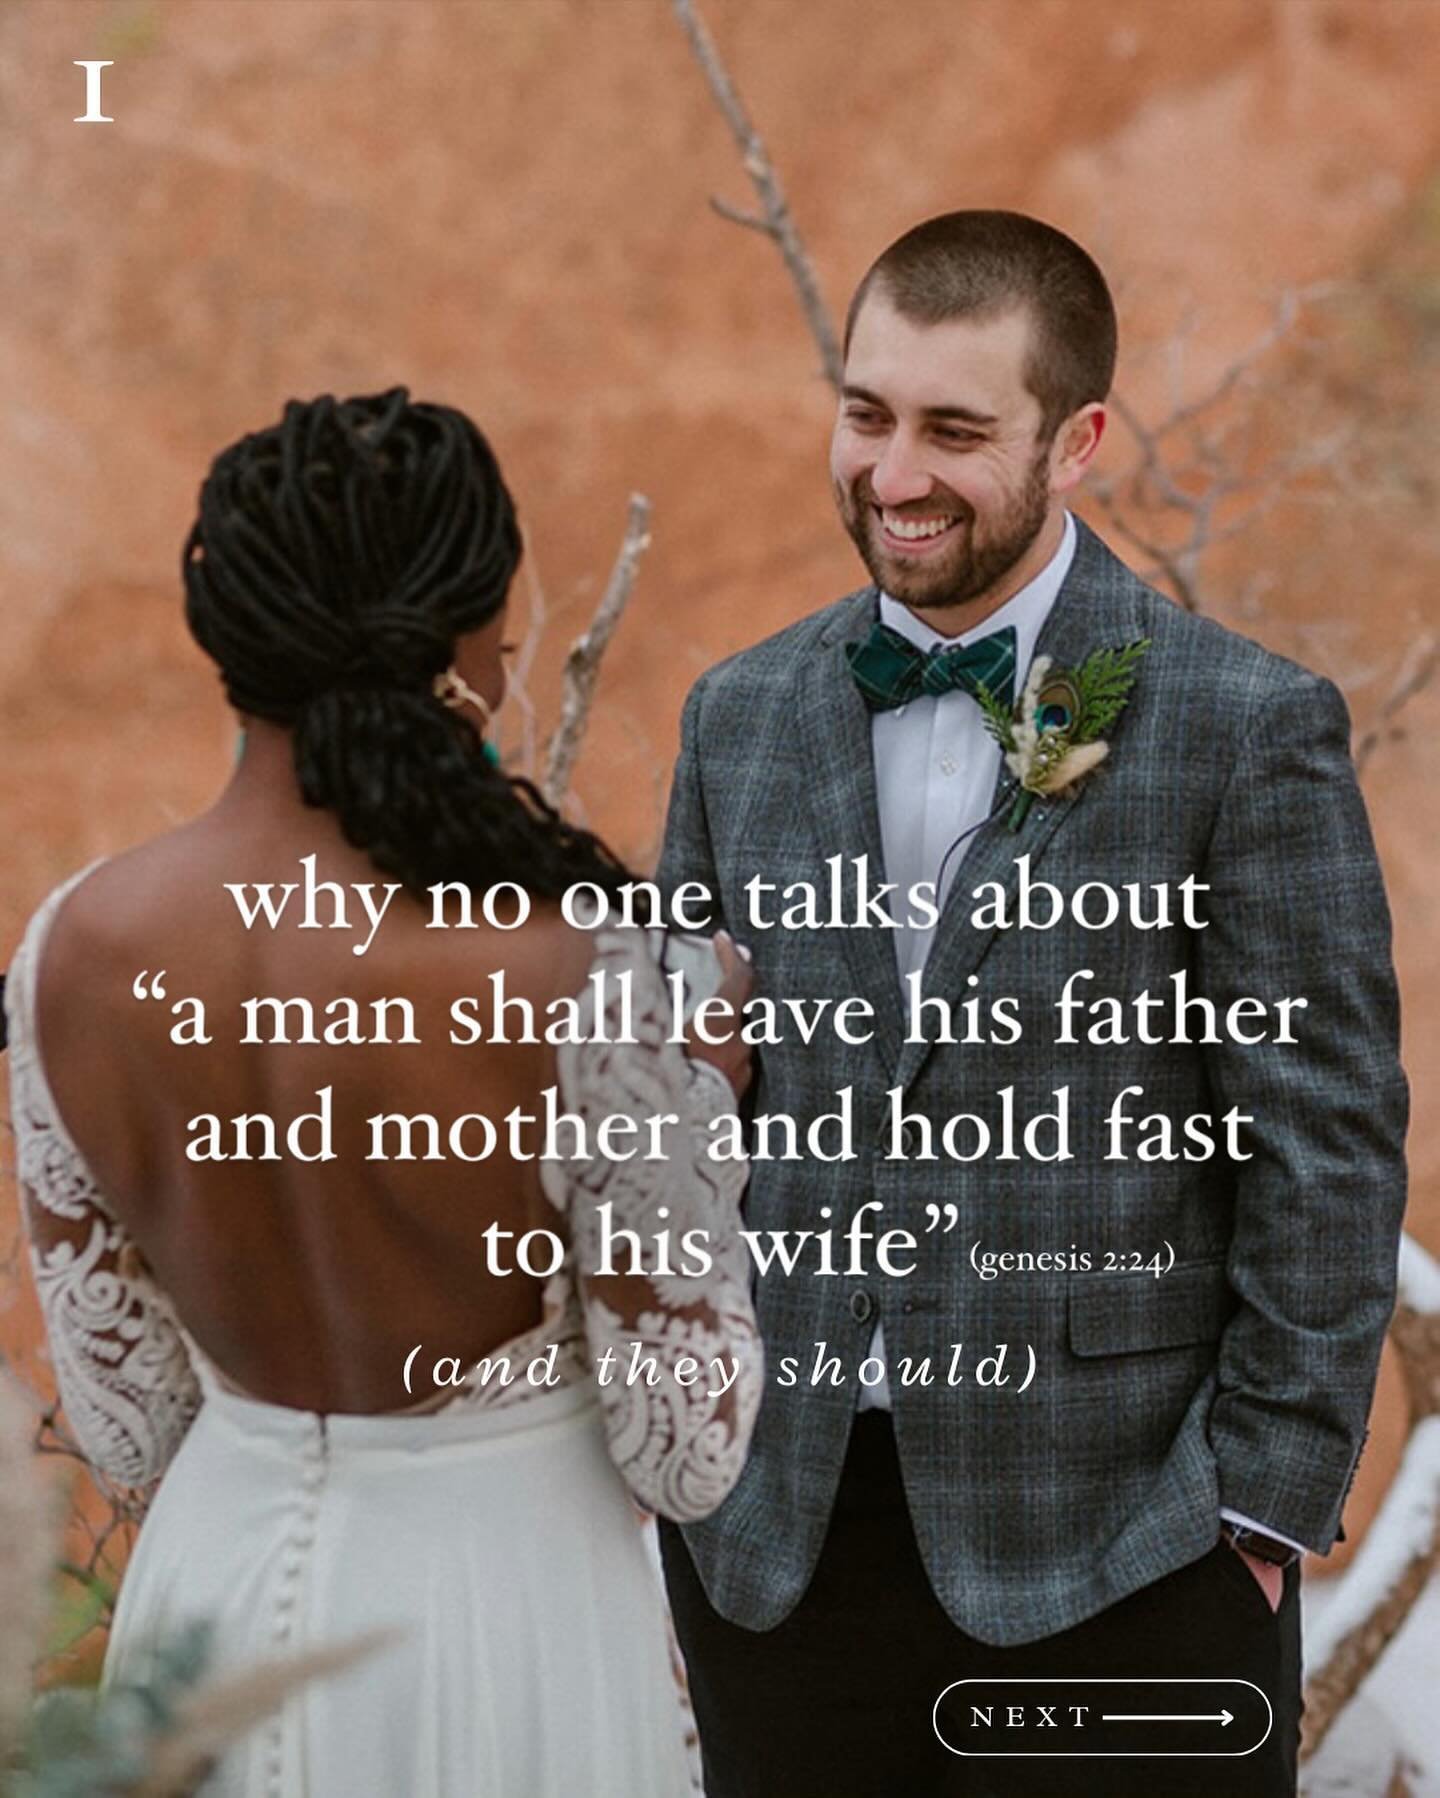 miiiight be time to have some real conversations, woman. 👀😋🫶🏾

✻ follow @adaezenoelle for more empowering content for women of God in life and interracial love ✌🏾 ✻

#faithbasedmarriage #interraciallove #swirllove #bwwm #wmbw #interracialmarriag